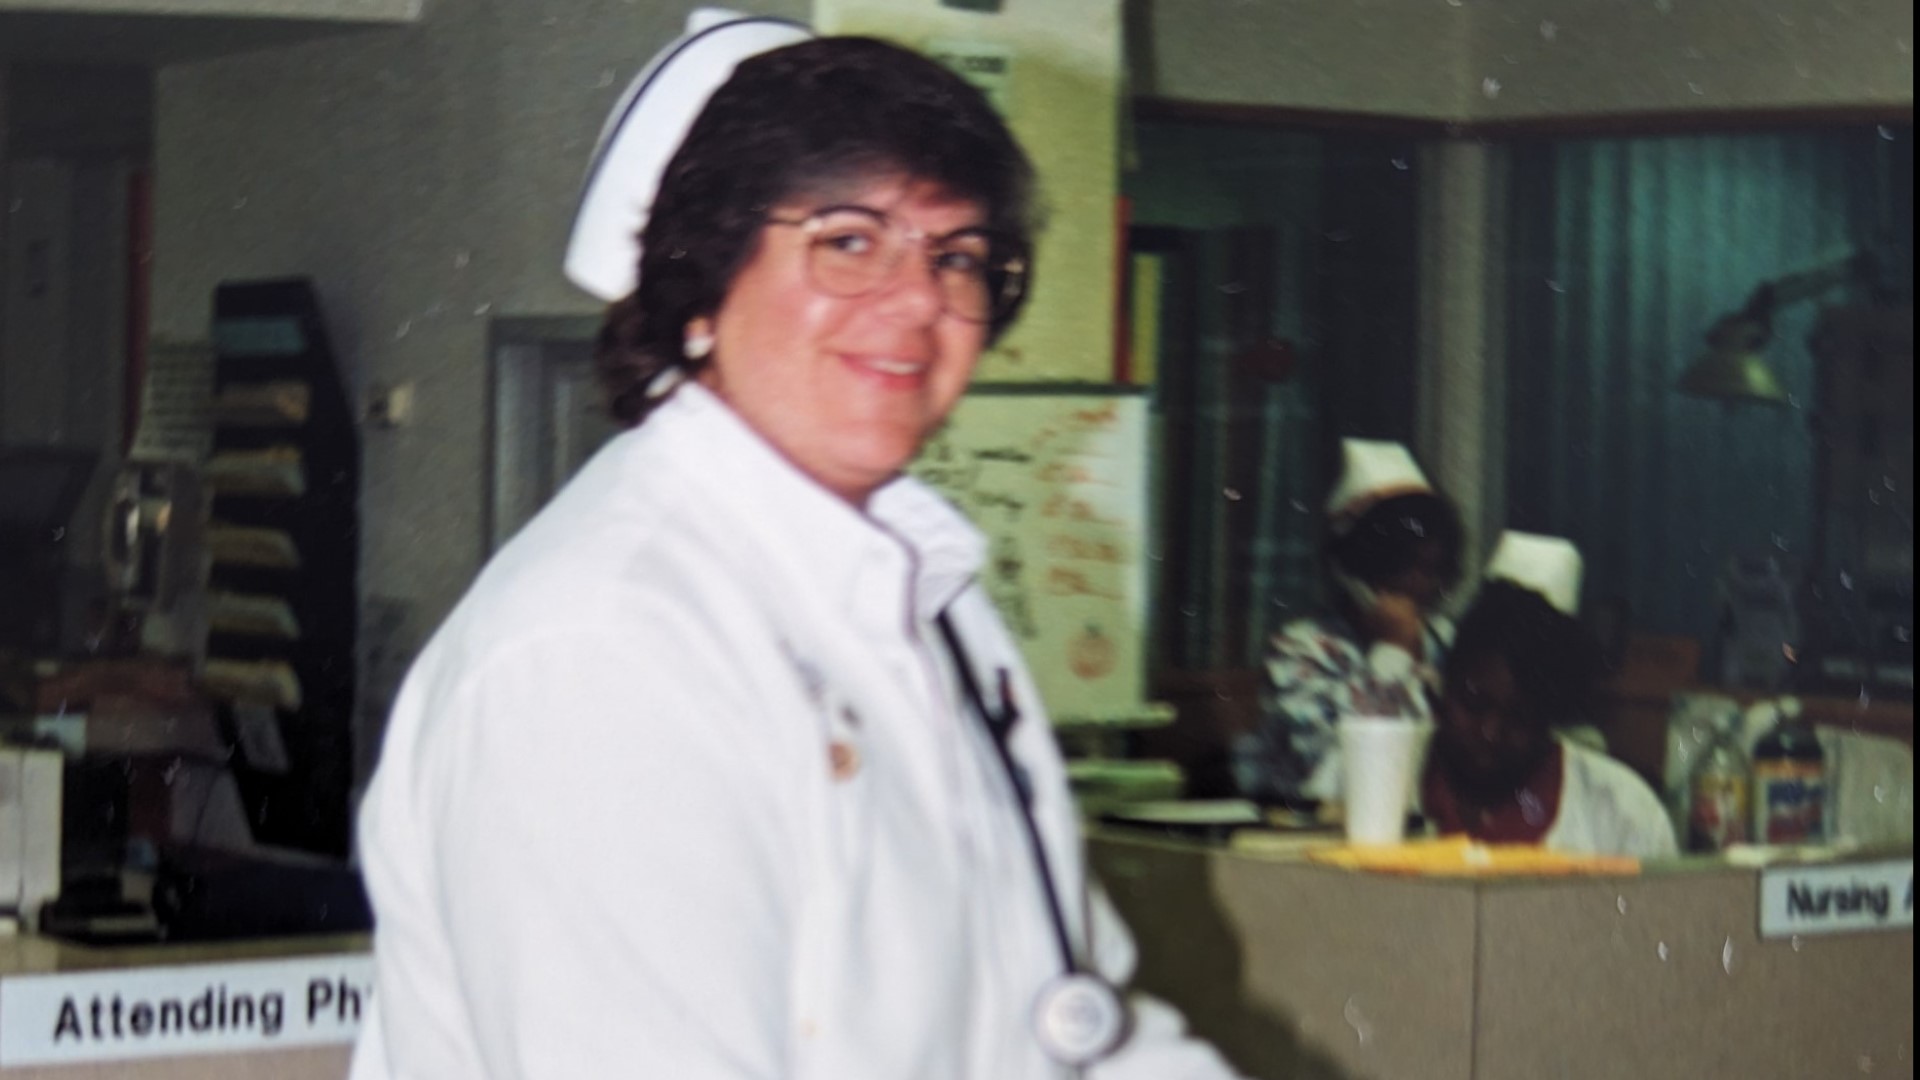 Longtime nurse Cheryl LaClair officially hung up her scrubs for good in September. But her legacy at Chesapeake Regional Medical Center continues.